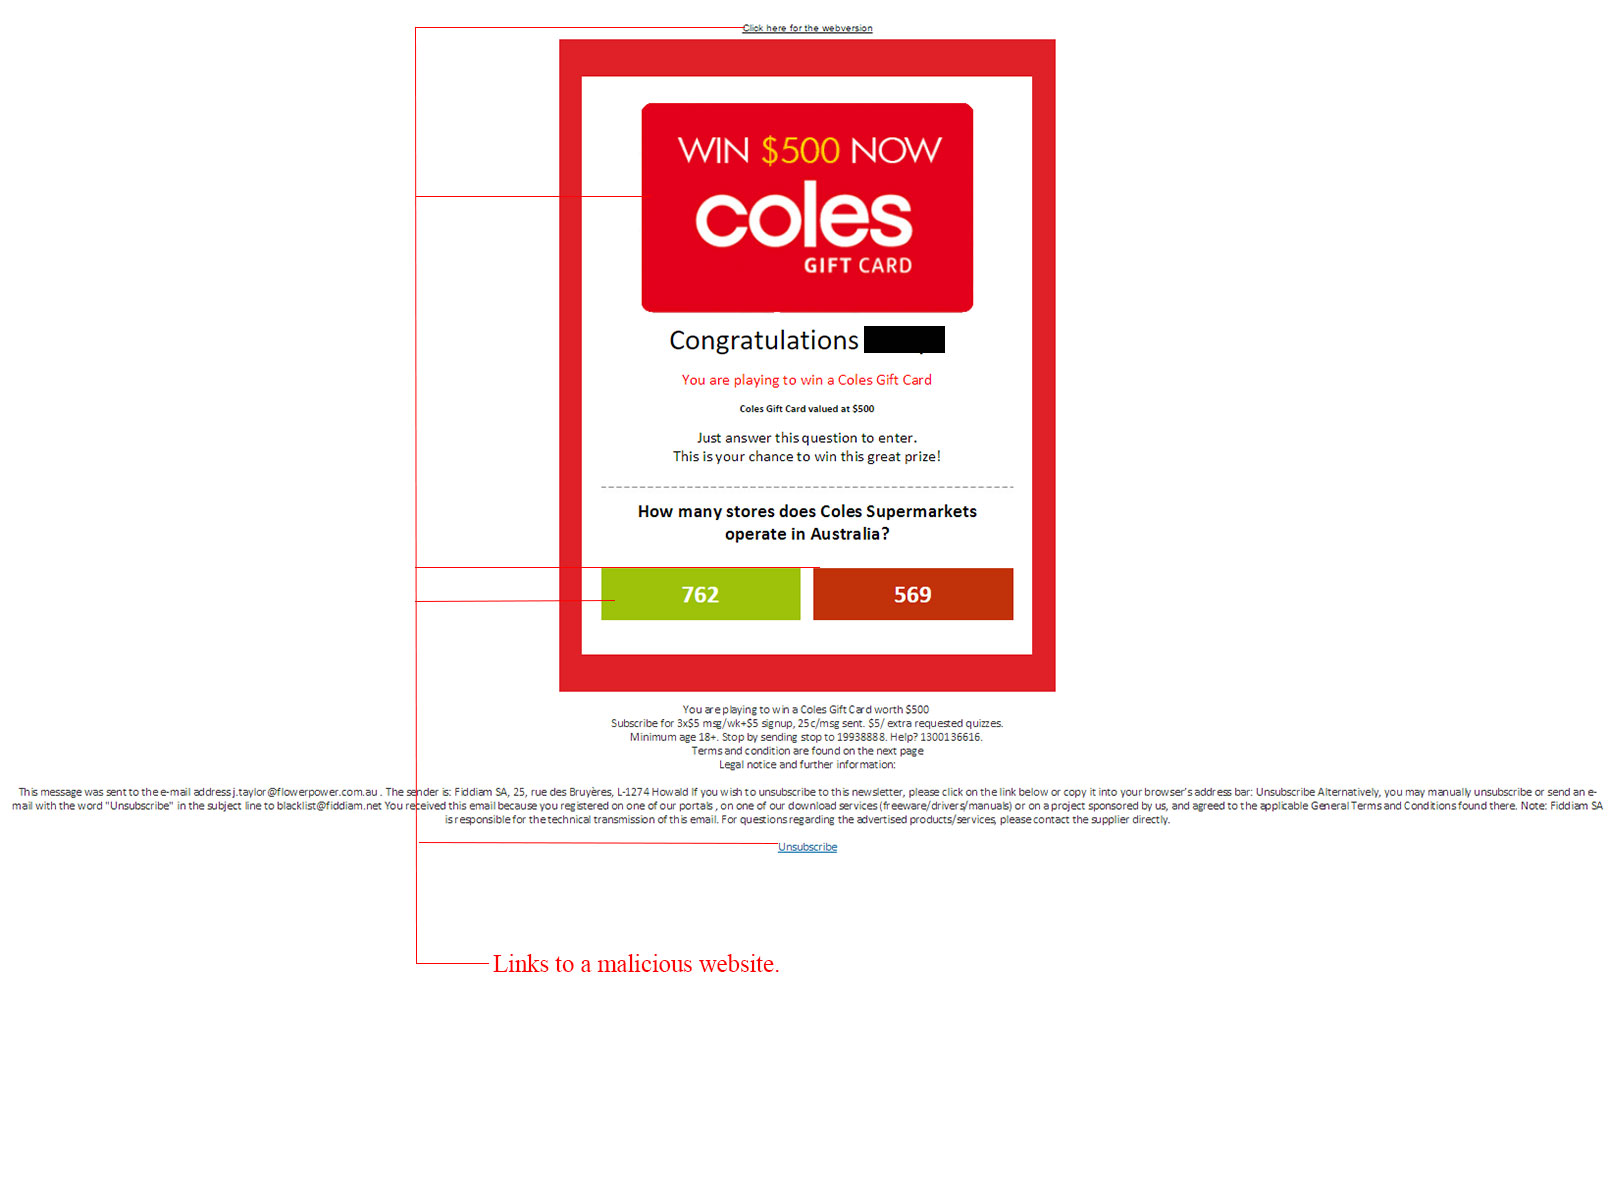 MailShark $500 Coles Gift Card Malware Scam